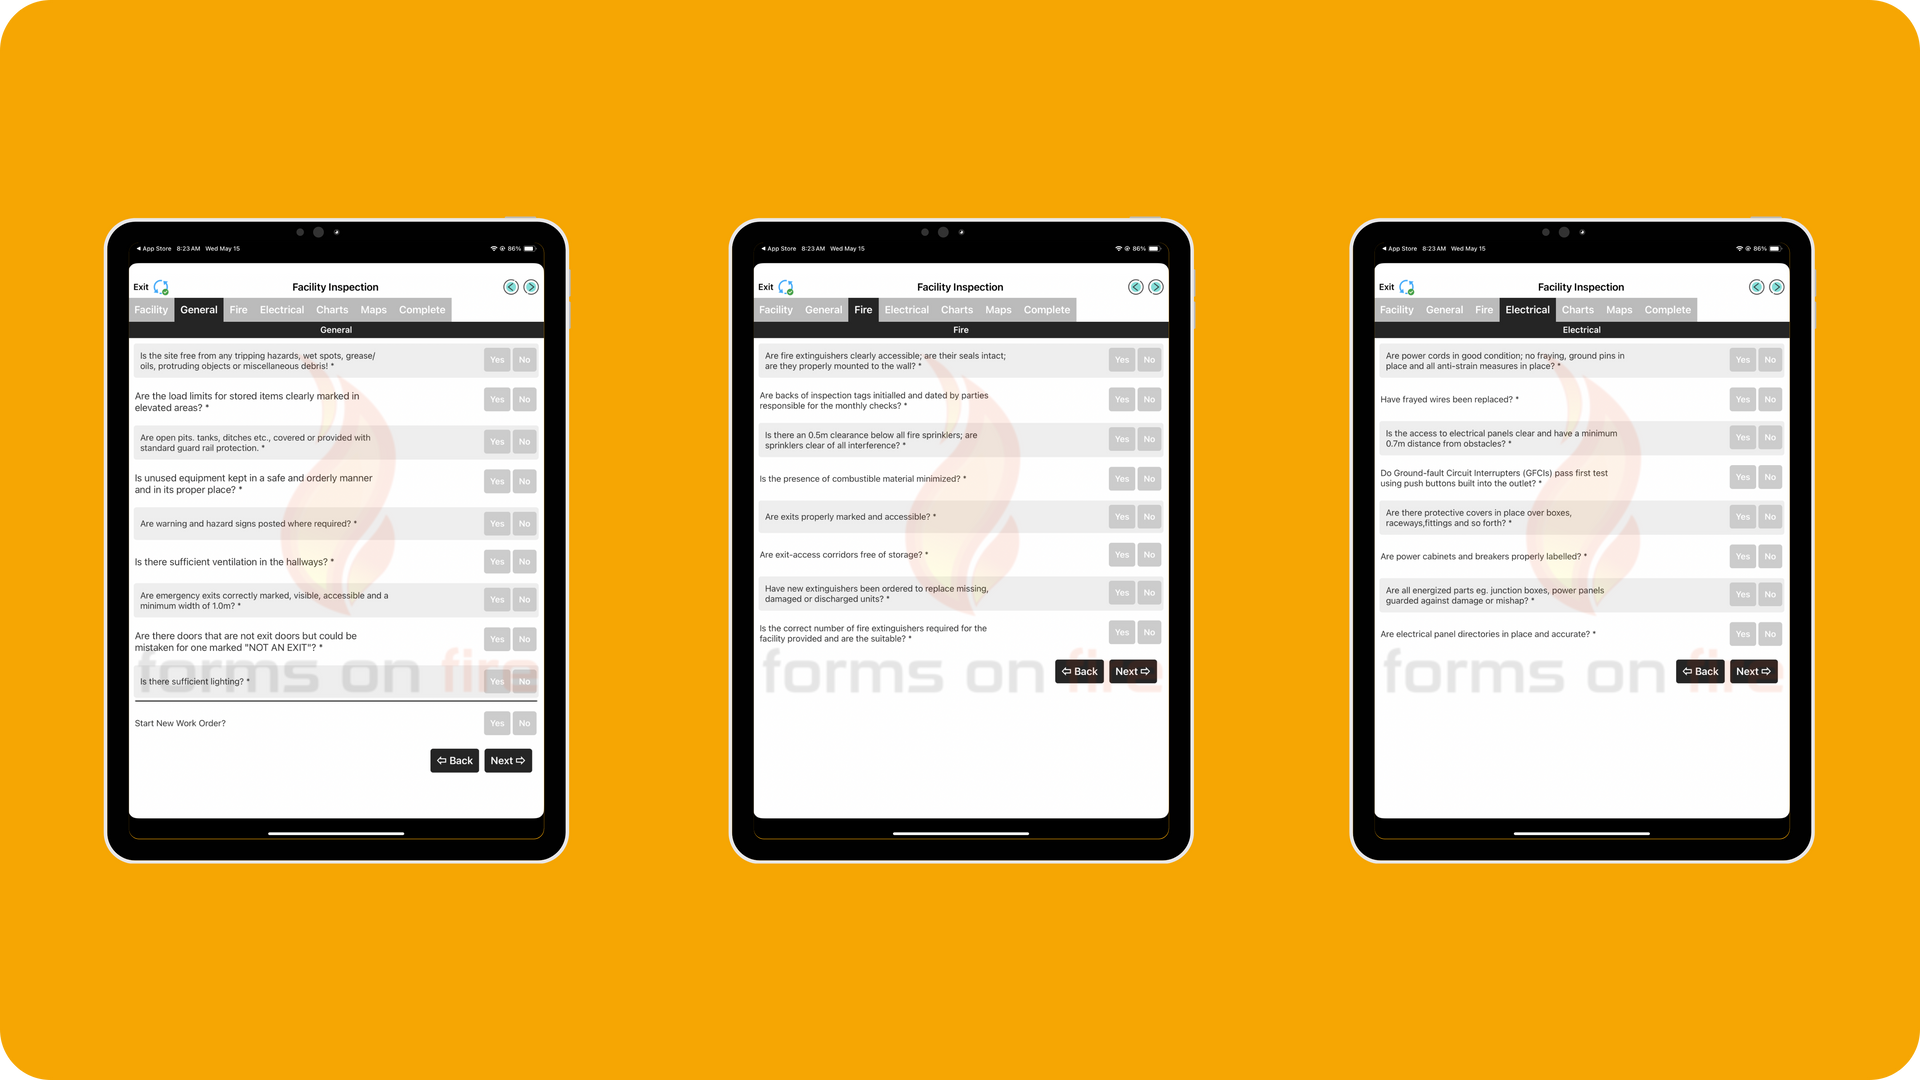 Screenshot examples of a facility inspection checklist template preloaded to the Forms on Fire app